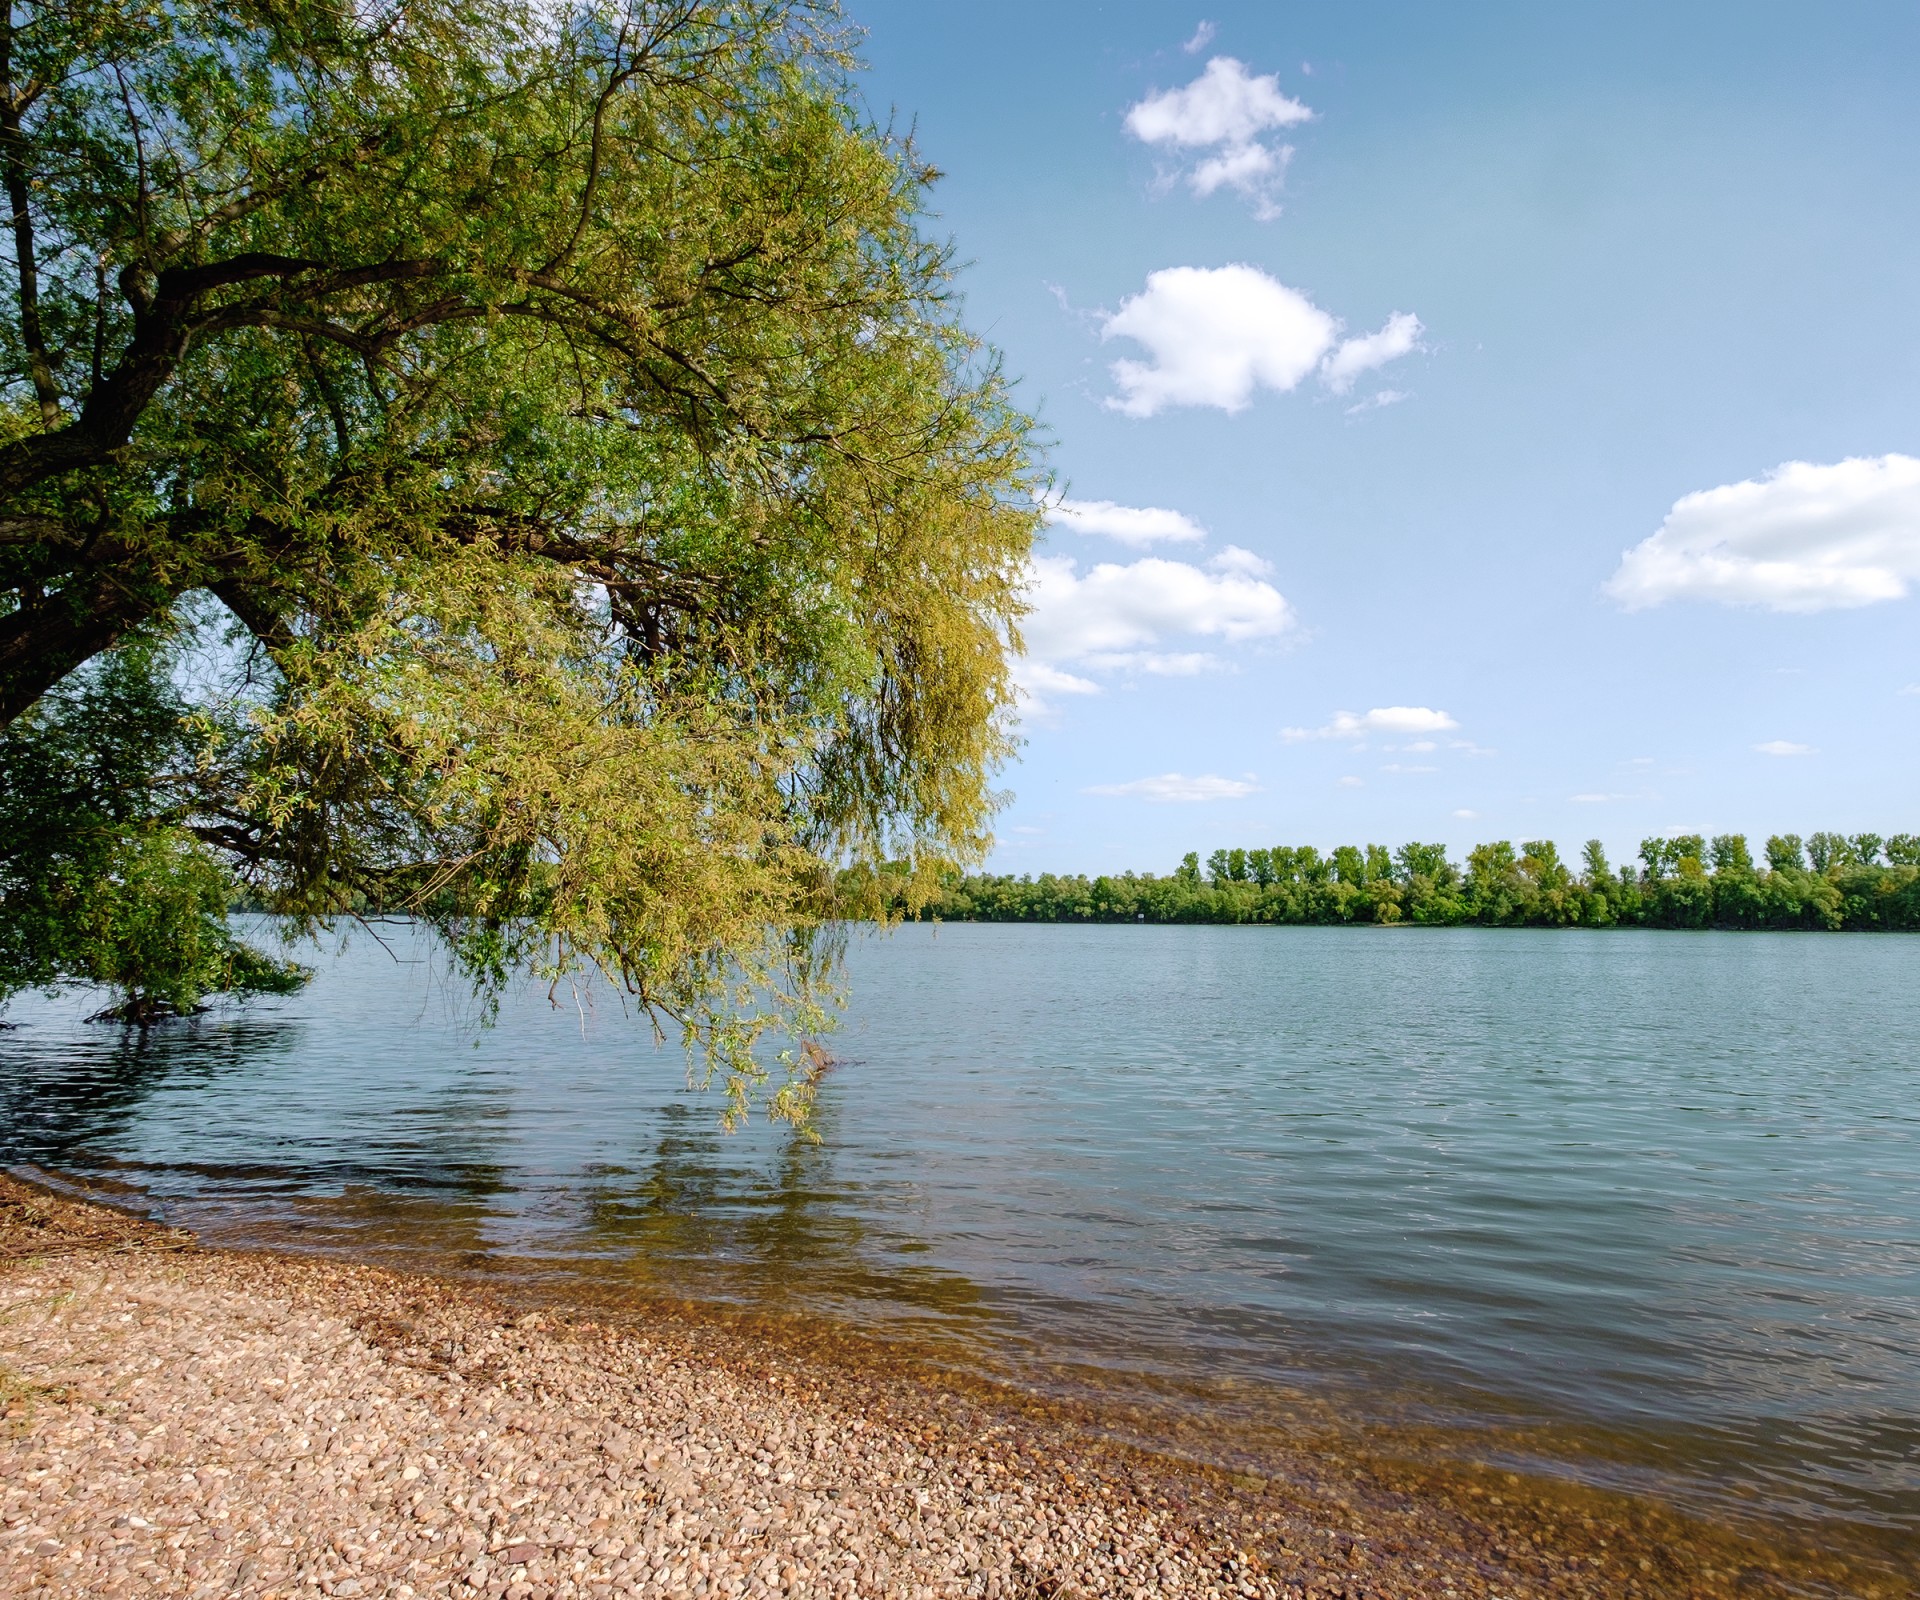 Tree at the shore of a lake with view to the other side of the shore	